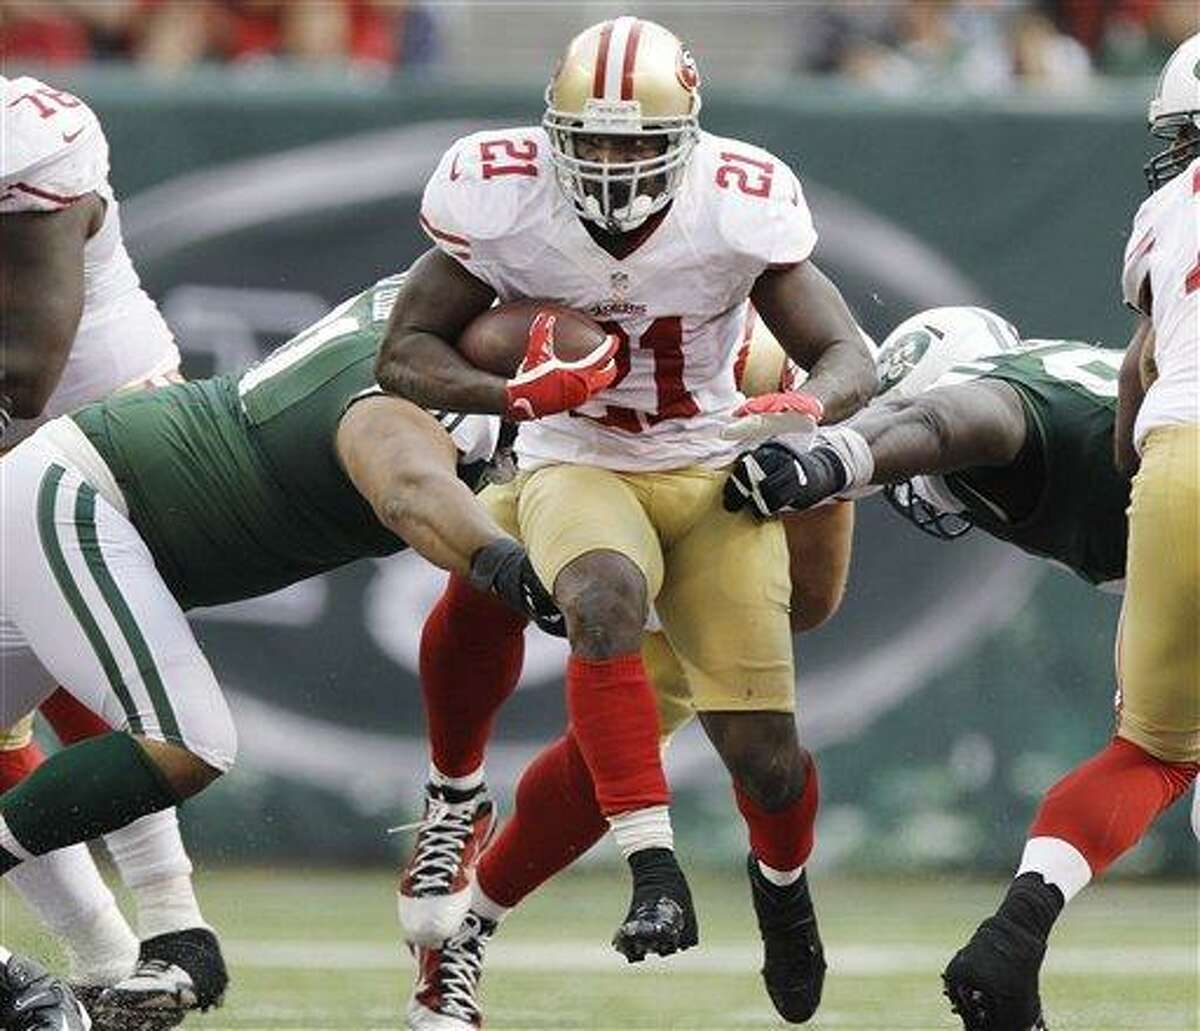 San Francisco 49ers running back Frank Gore (21) breaks through the line of scrimage during the second half of an NFL football game against the New York Jets Sunday, Sept. 30, 2012, in East Rutherford, N.J. (AP Photo/Kathy Willens)